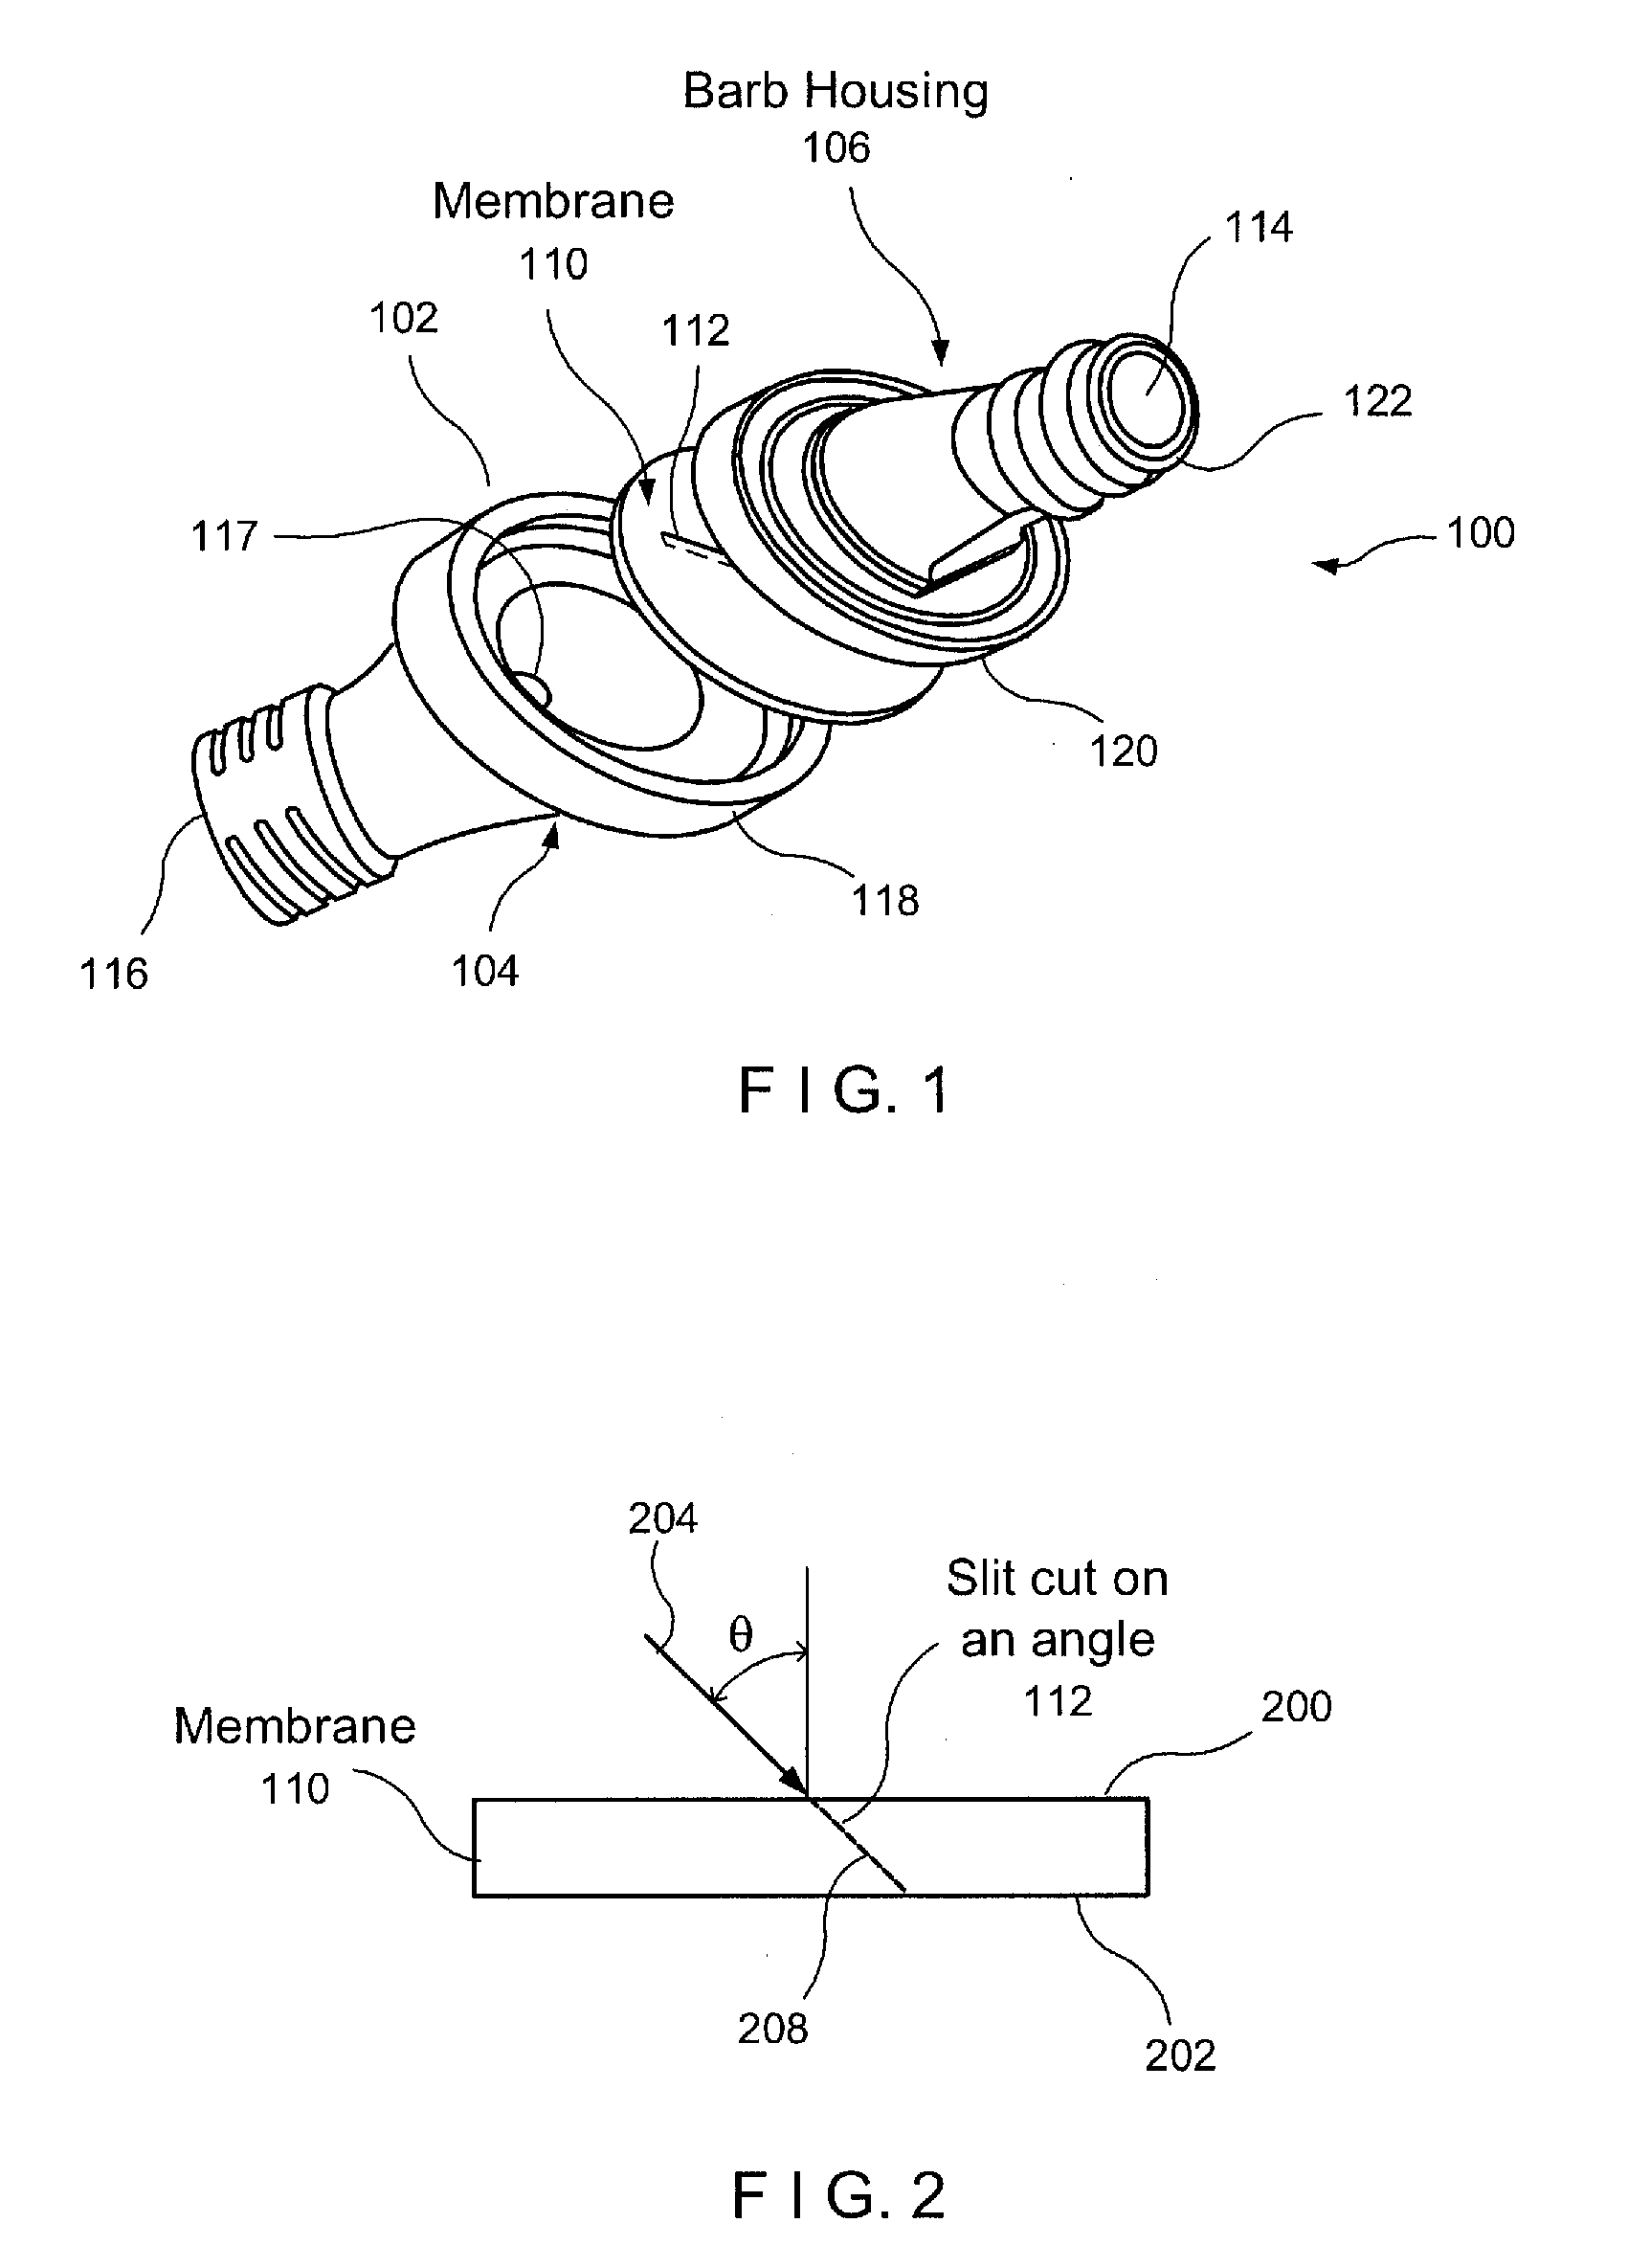 Pressure Activated Valve with Angled Slit